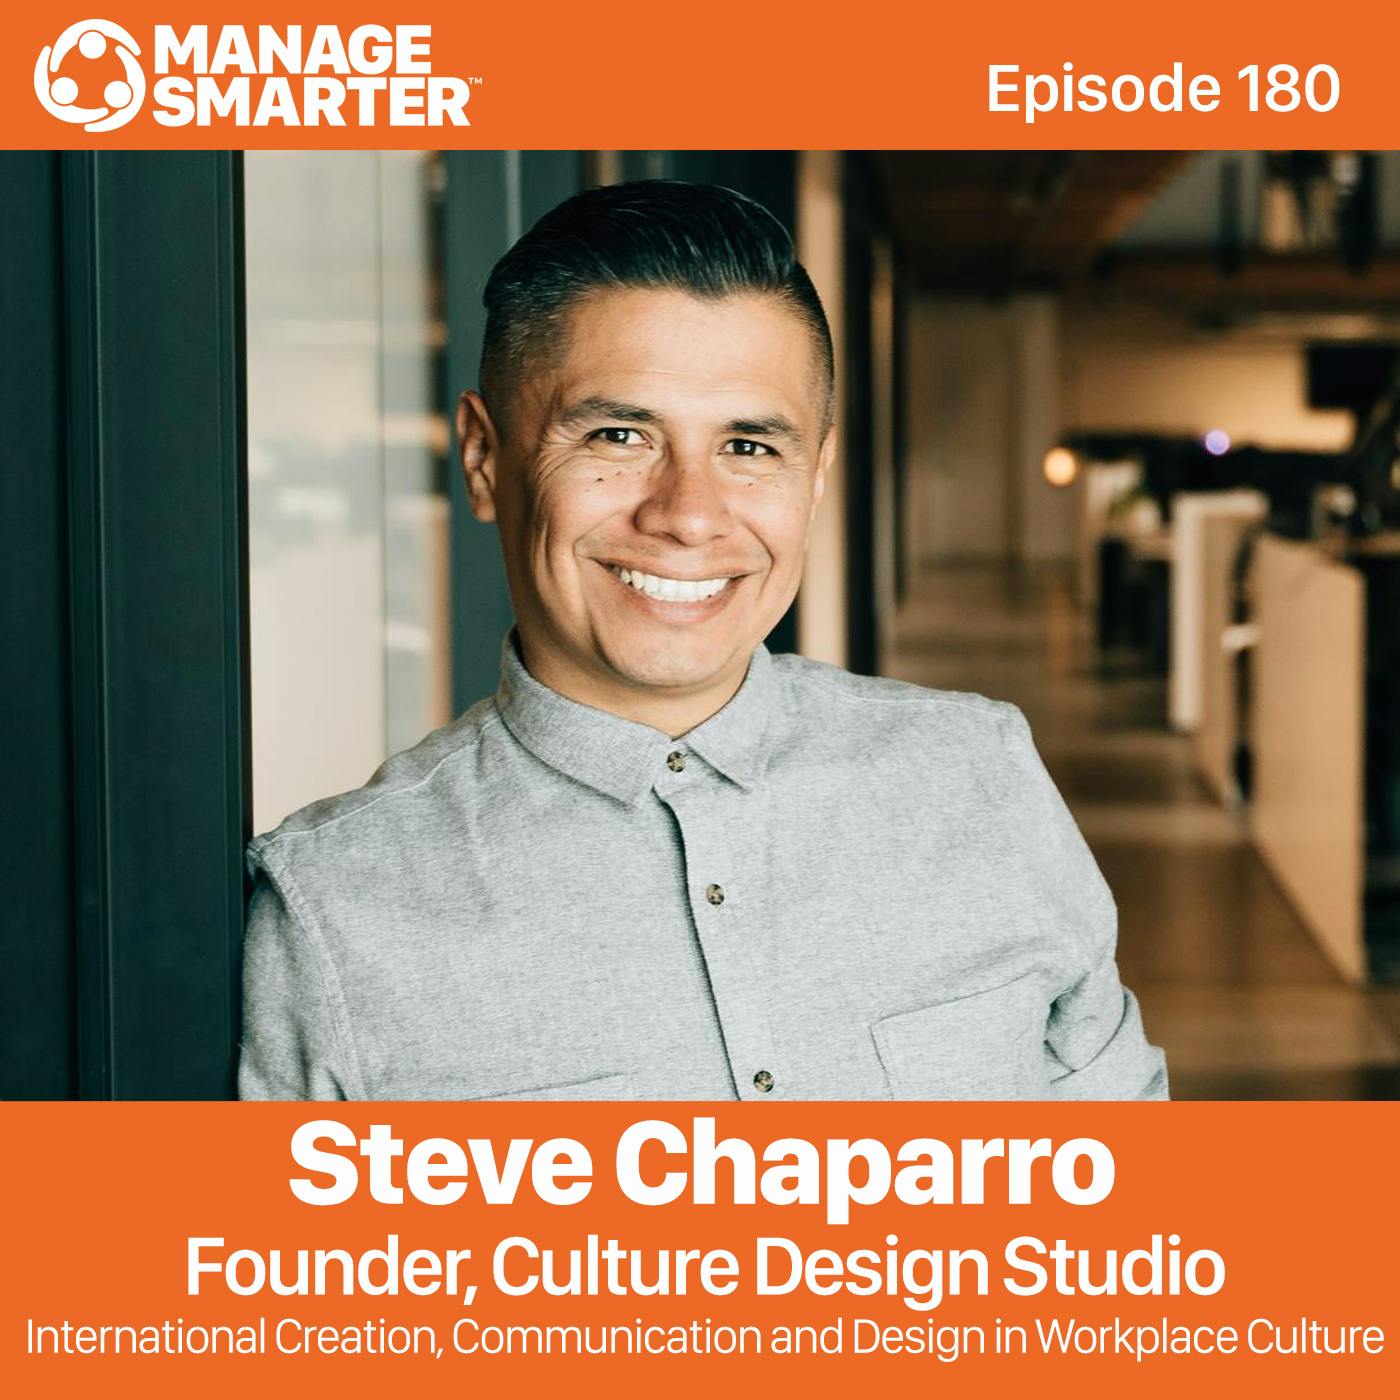 180 Steve Chaparro: International Creation, Communication and Design in Workplace Culture